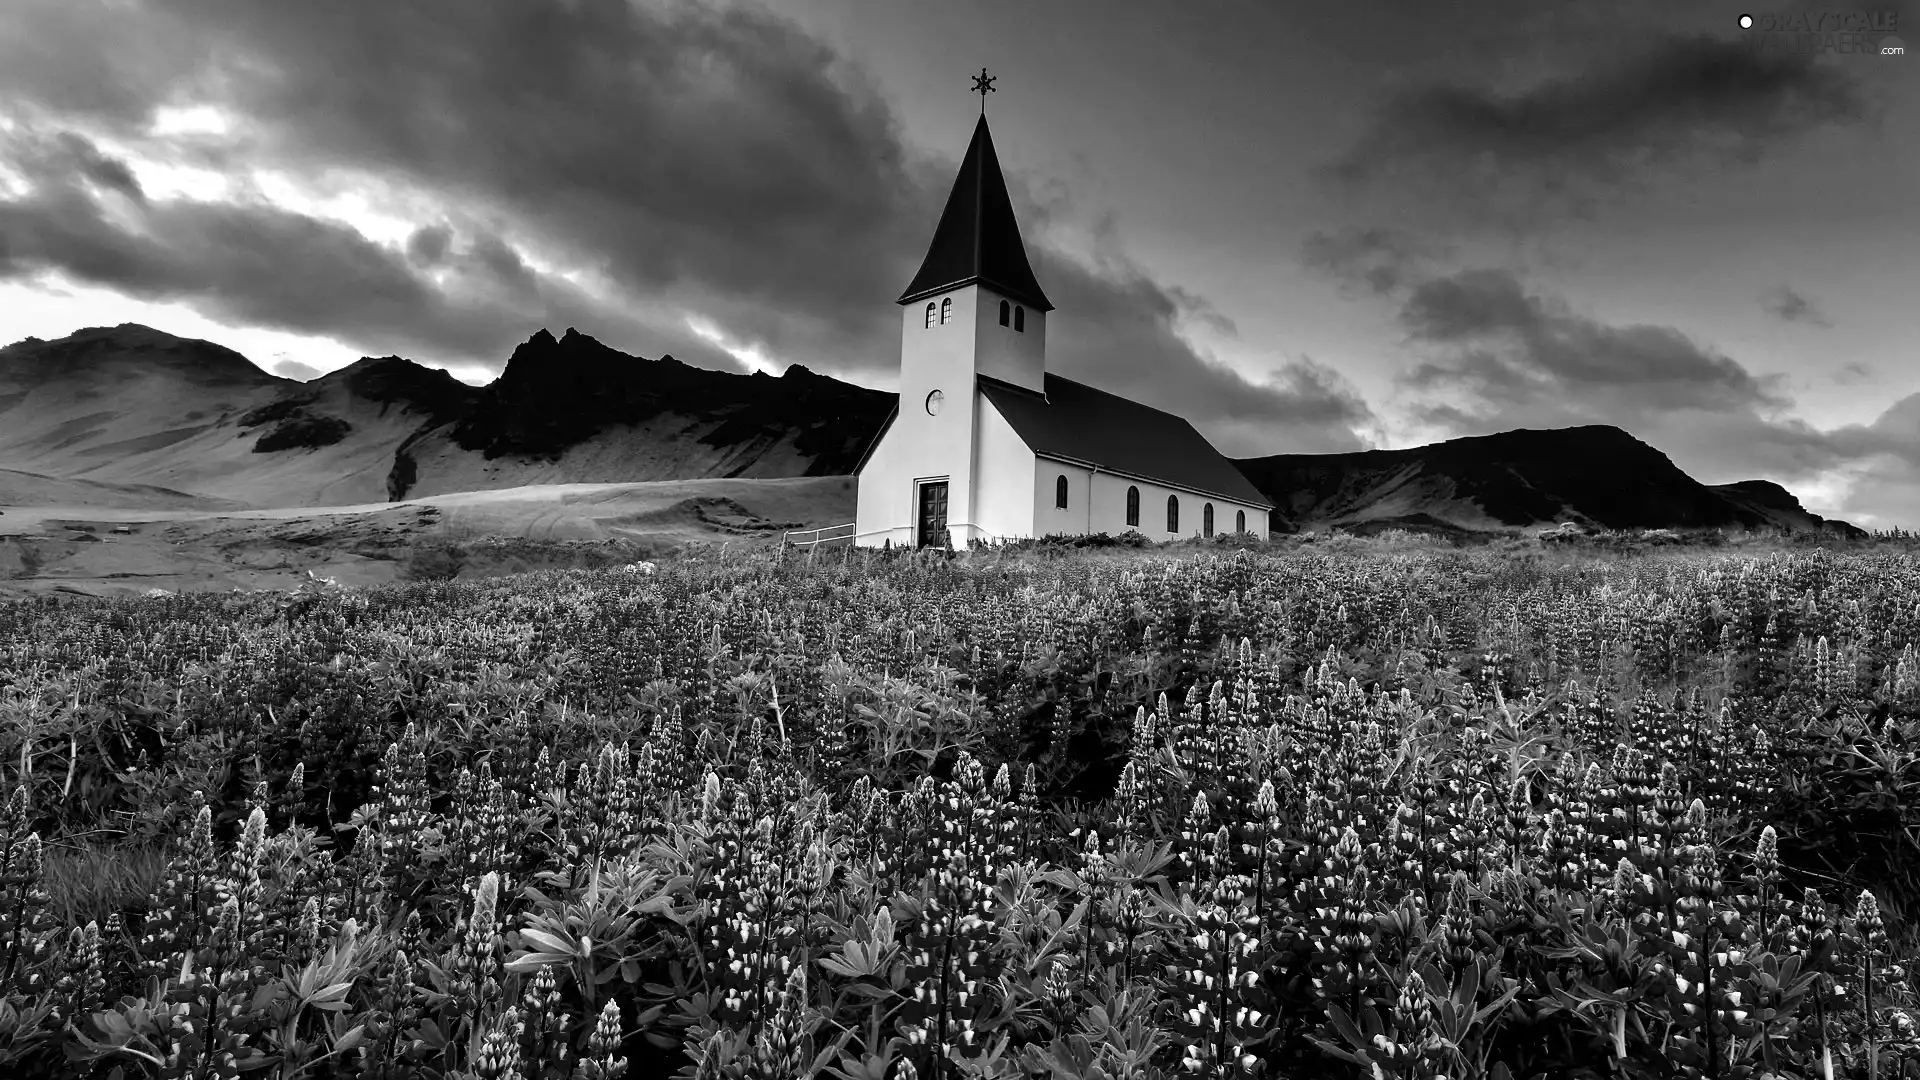 Mountains, Church, Flowers, Meadow